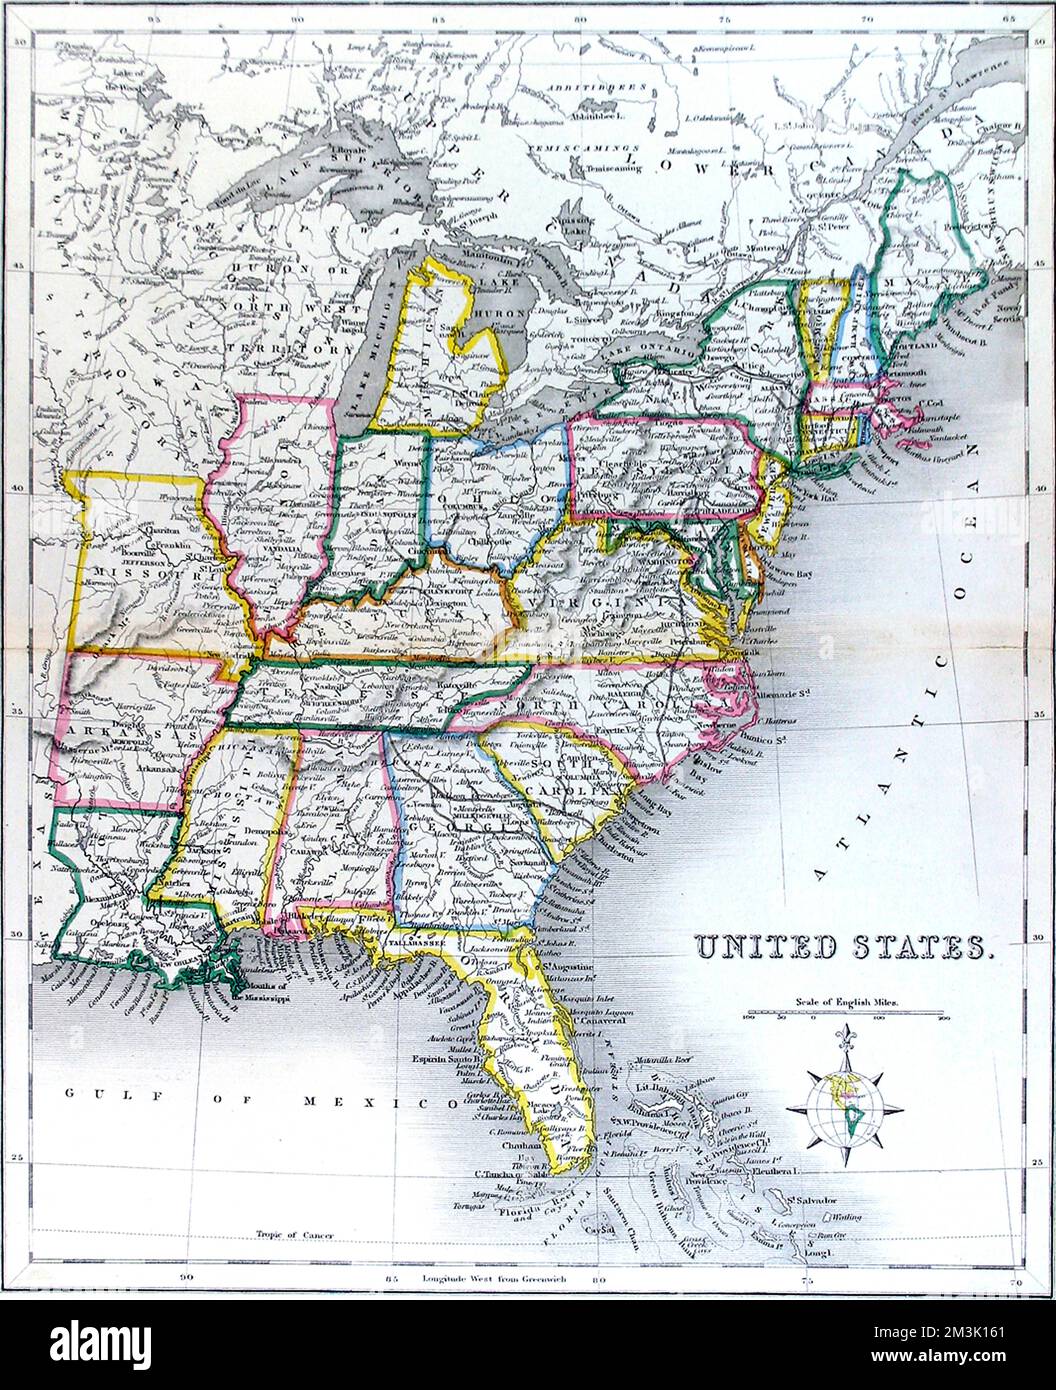 Printed Map of the United States by James Gilbert with coloured watercolour markings delineating individual states.     Date: 1846 Stock Photo